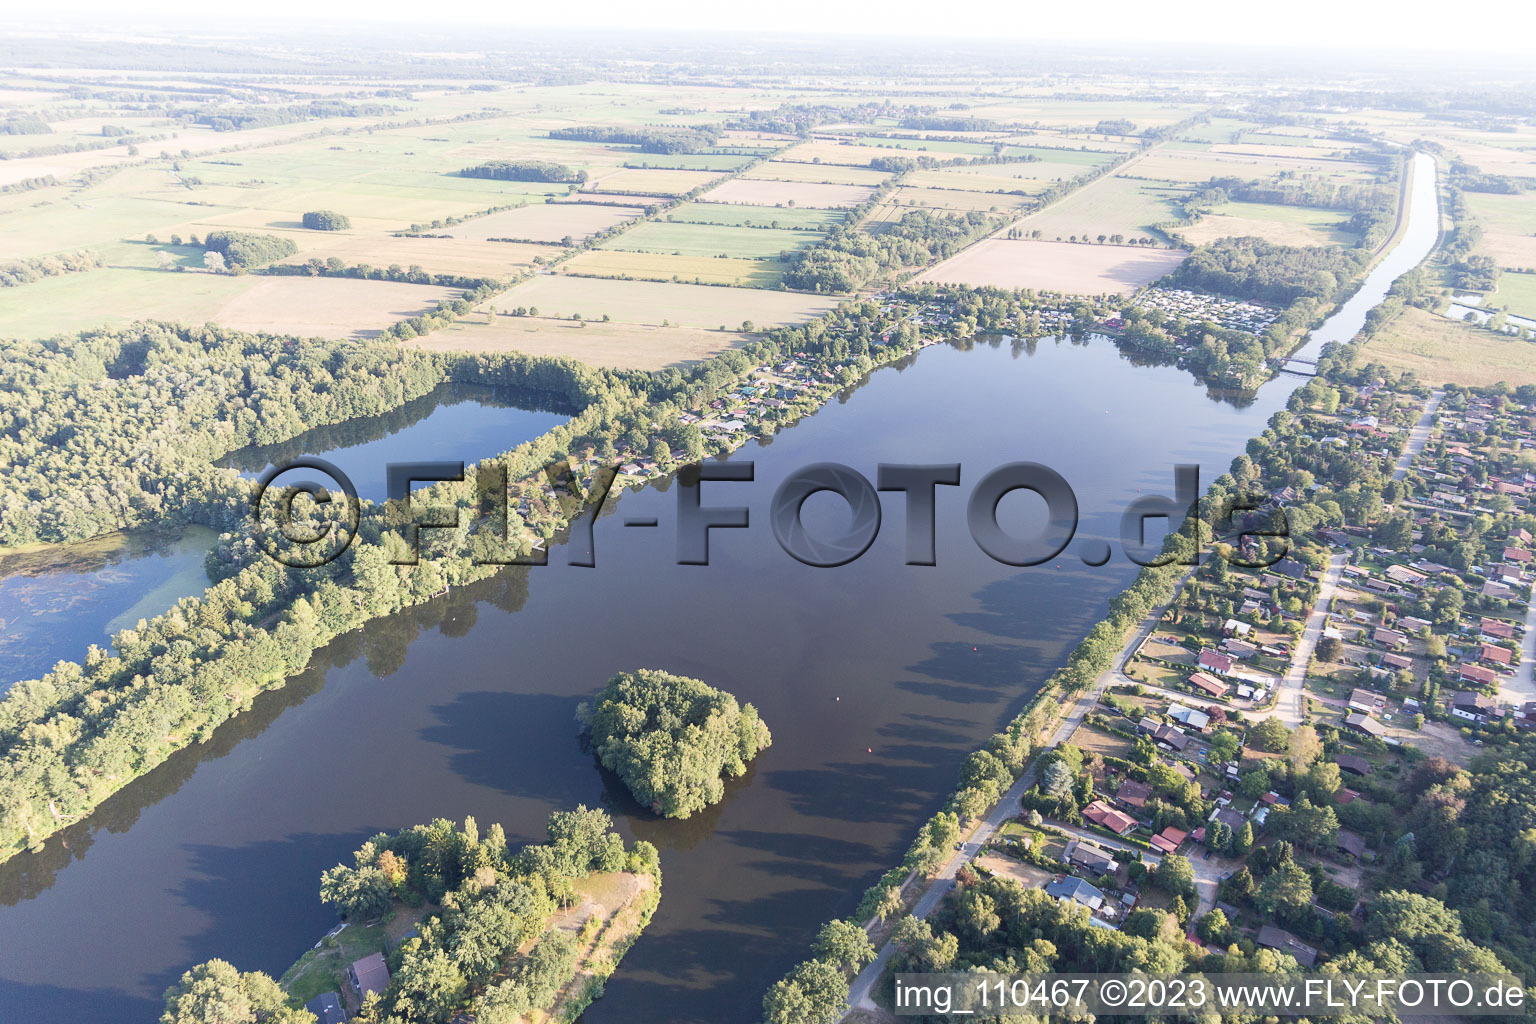 Camping Lanzer See in Basedow in the state Schleswig Holstein, Germany from the plane